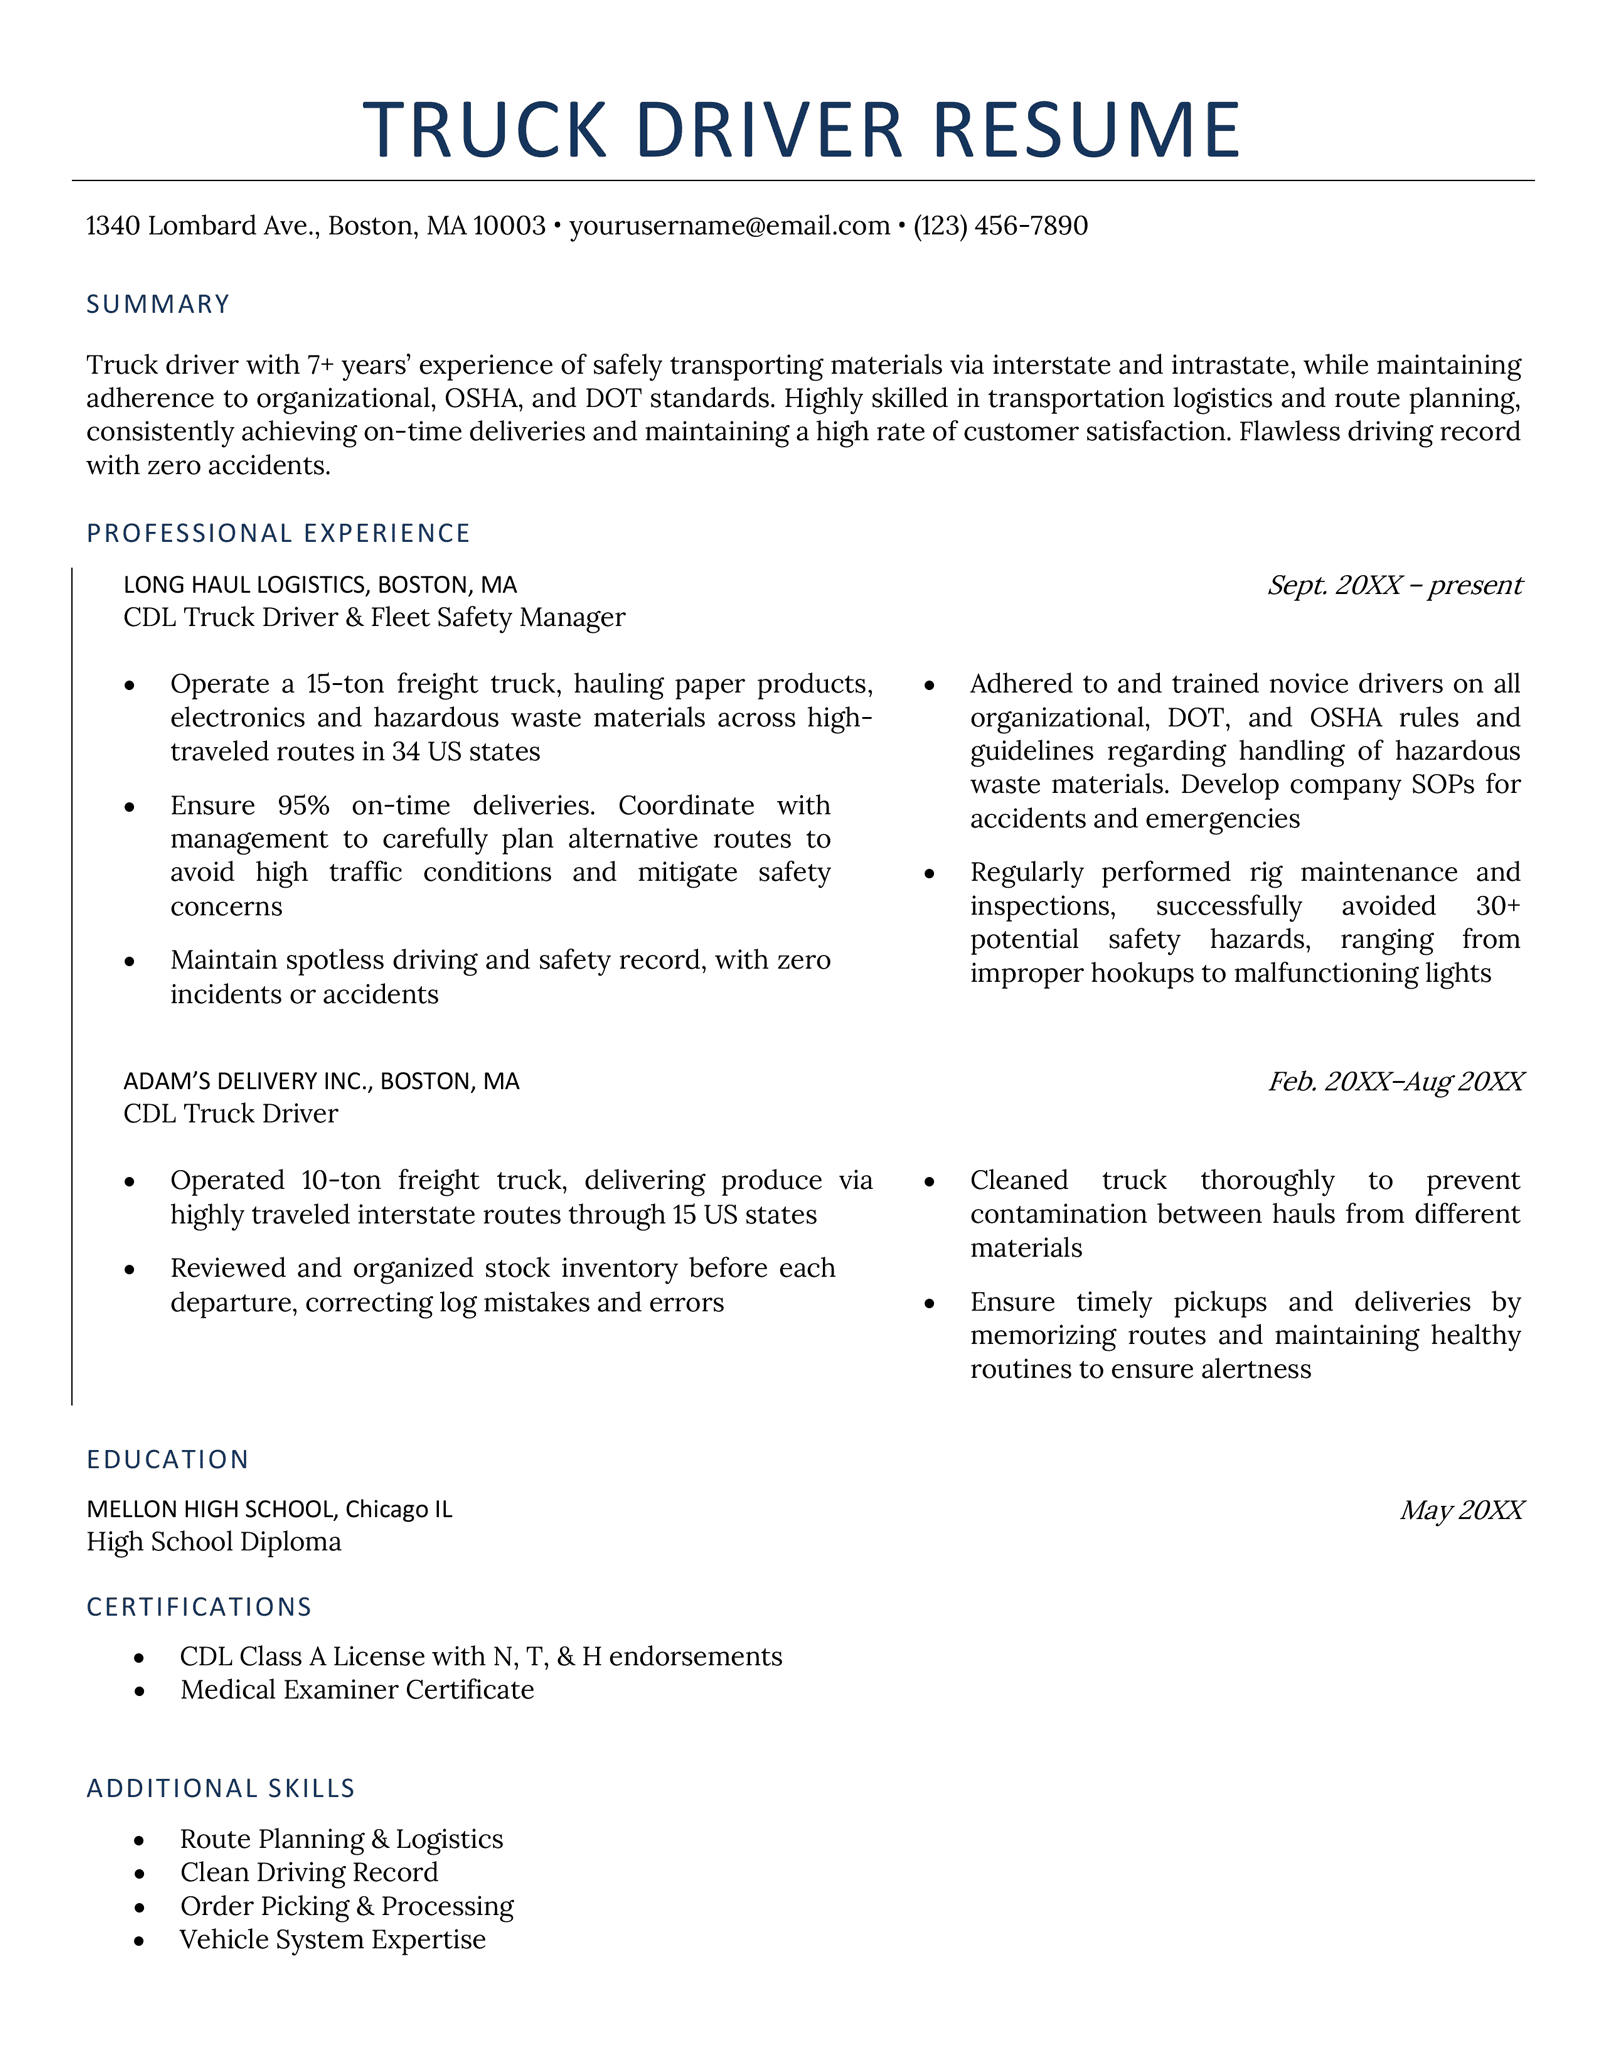 An example of a truck driver resume on a template with dark blue font for the resume heading